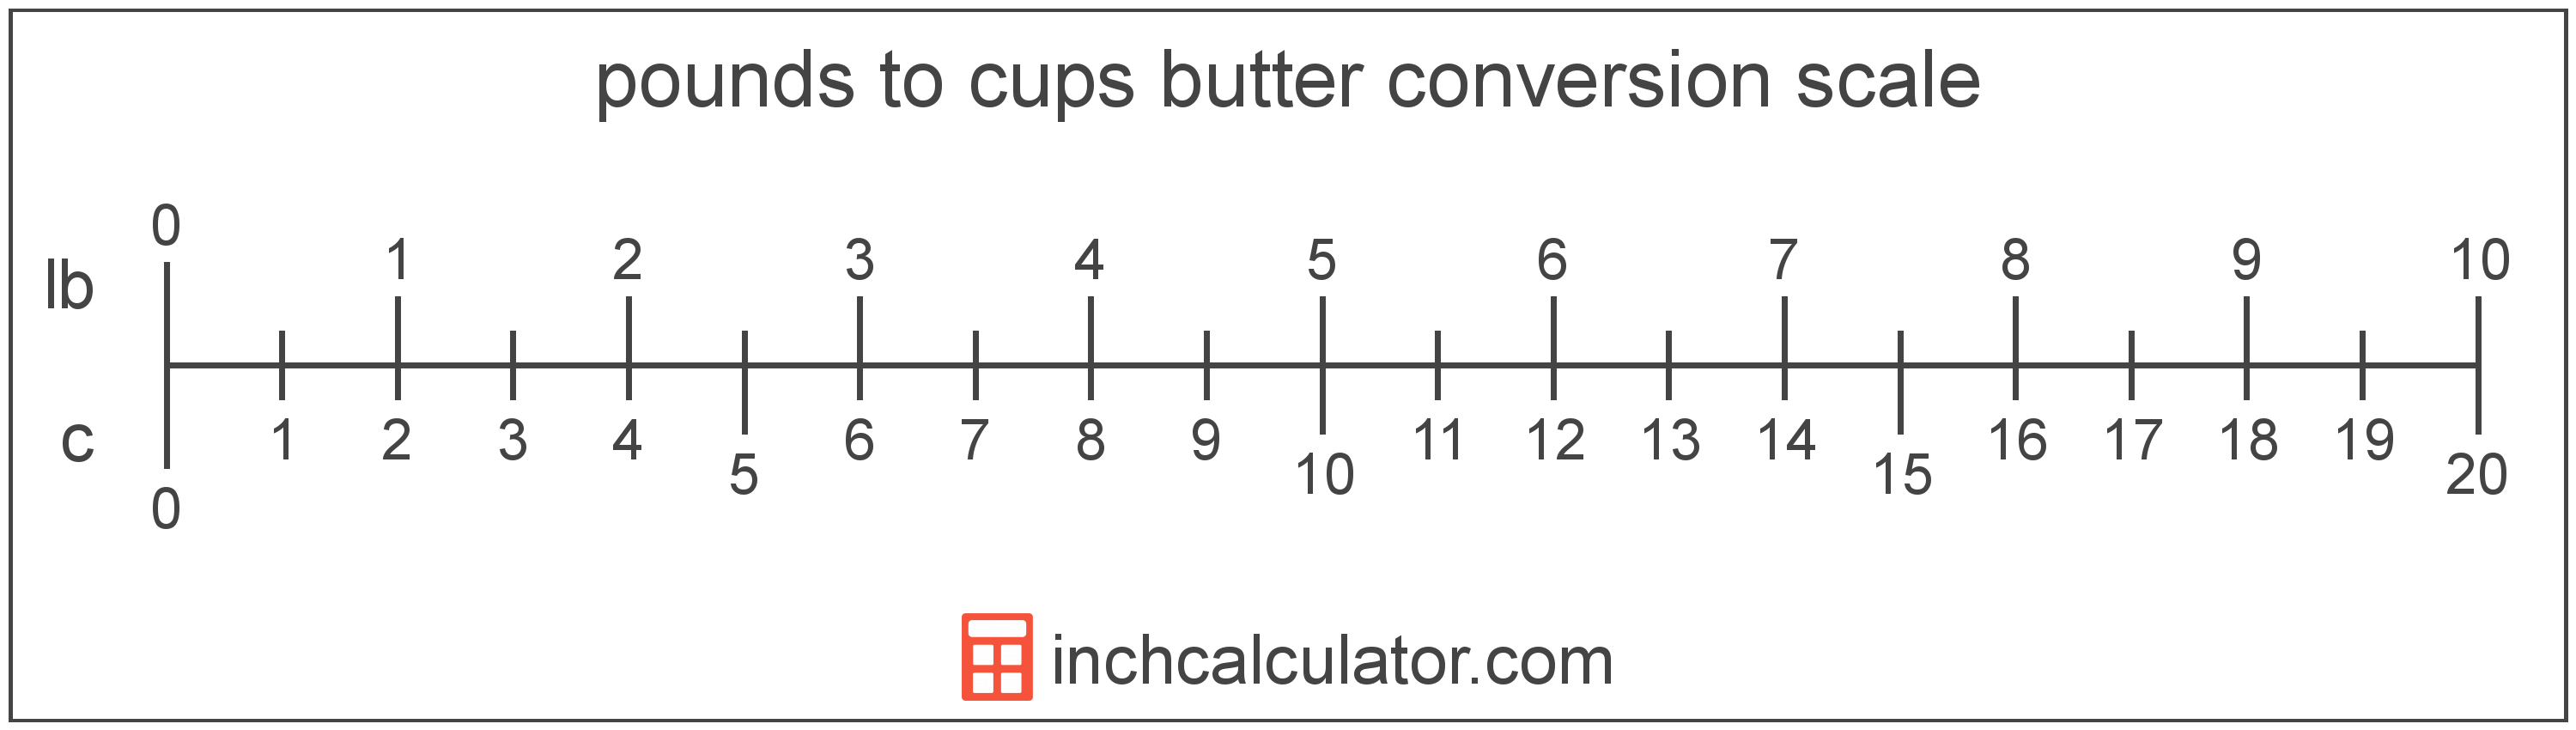 pounds-of-butter-to-cups-conversion-lb-to-c-inch-calculator